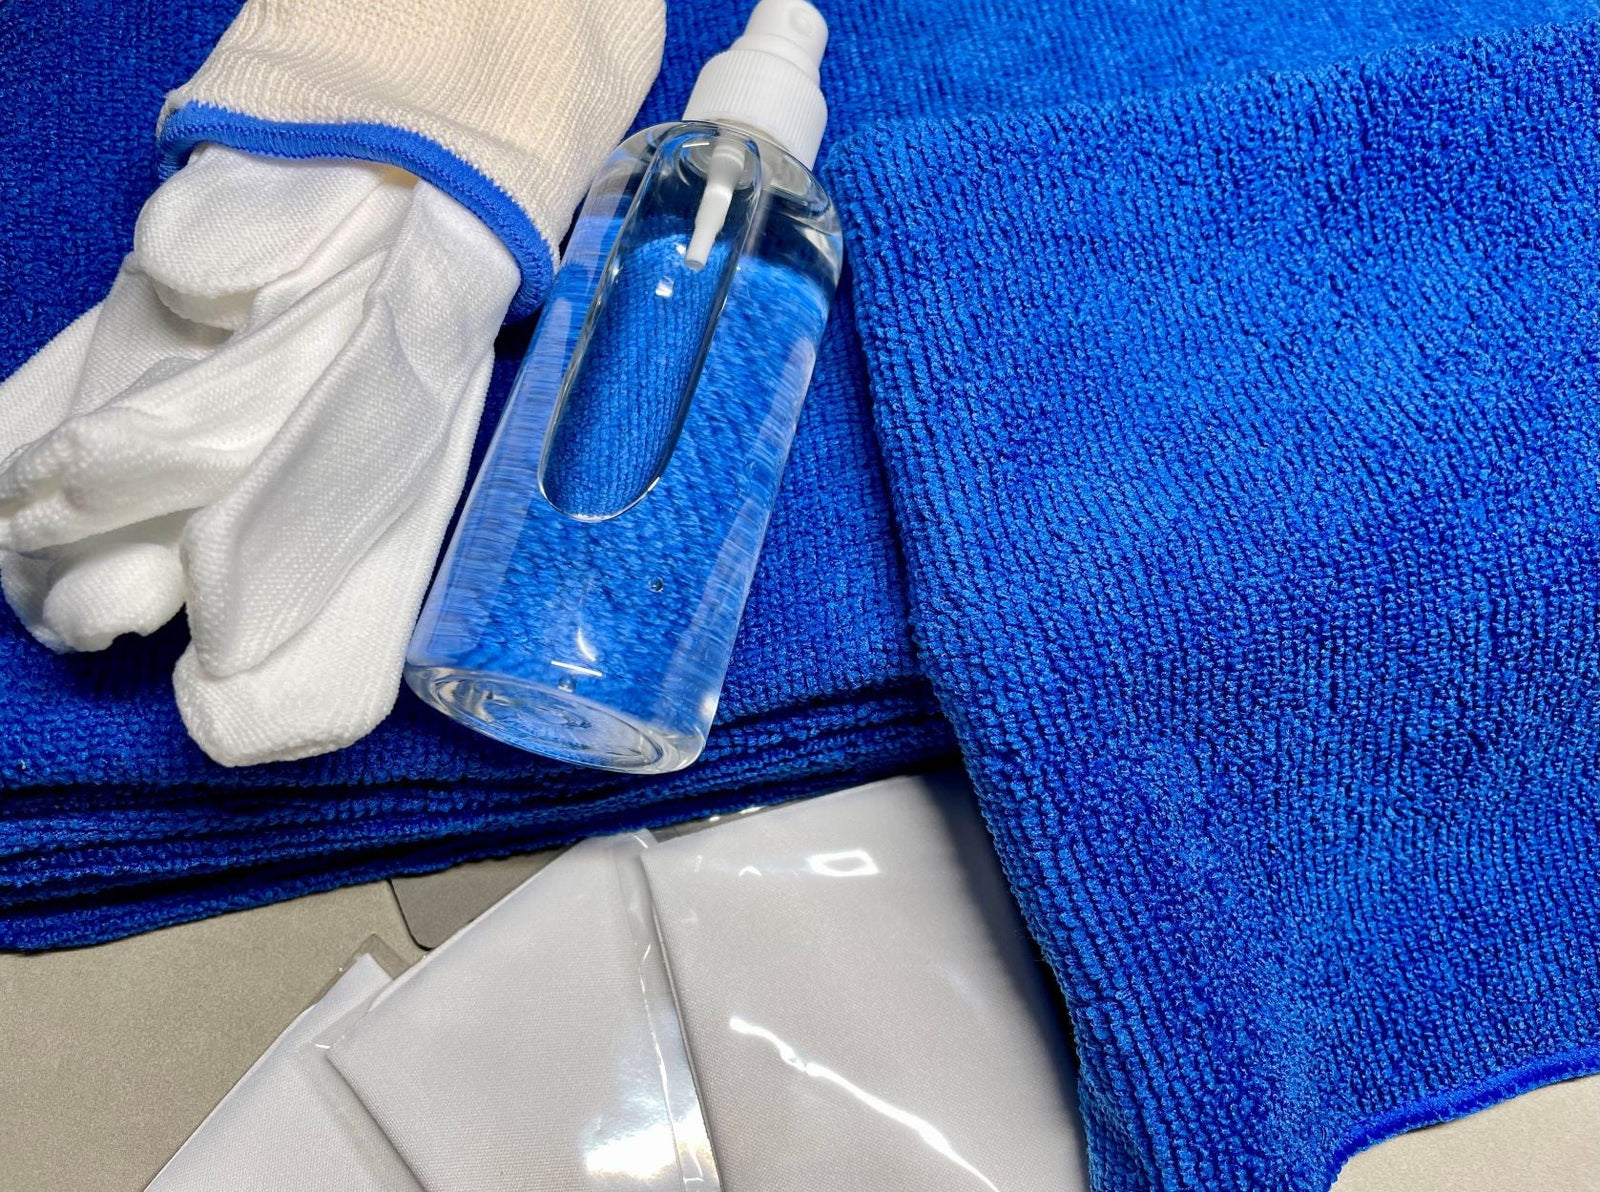 Vinyl cleaning fluid with lint free gloves and microfibre cloths